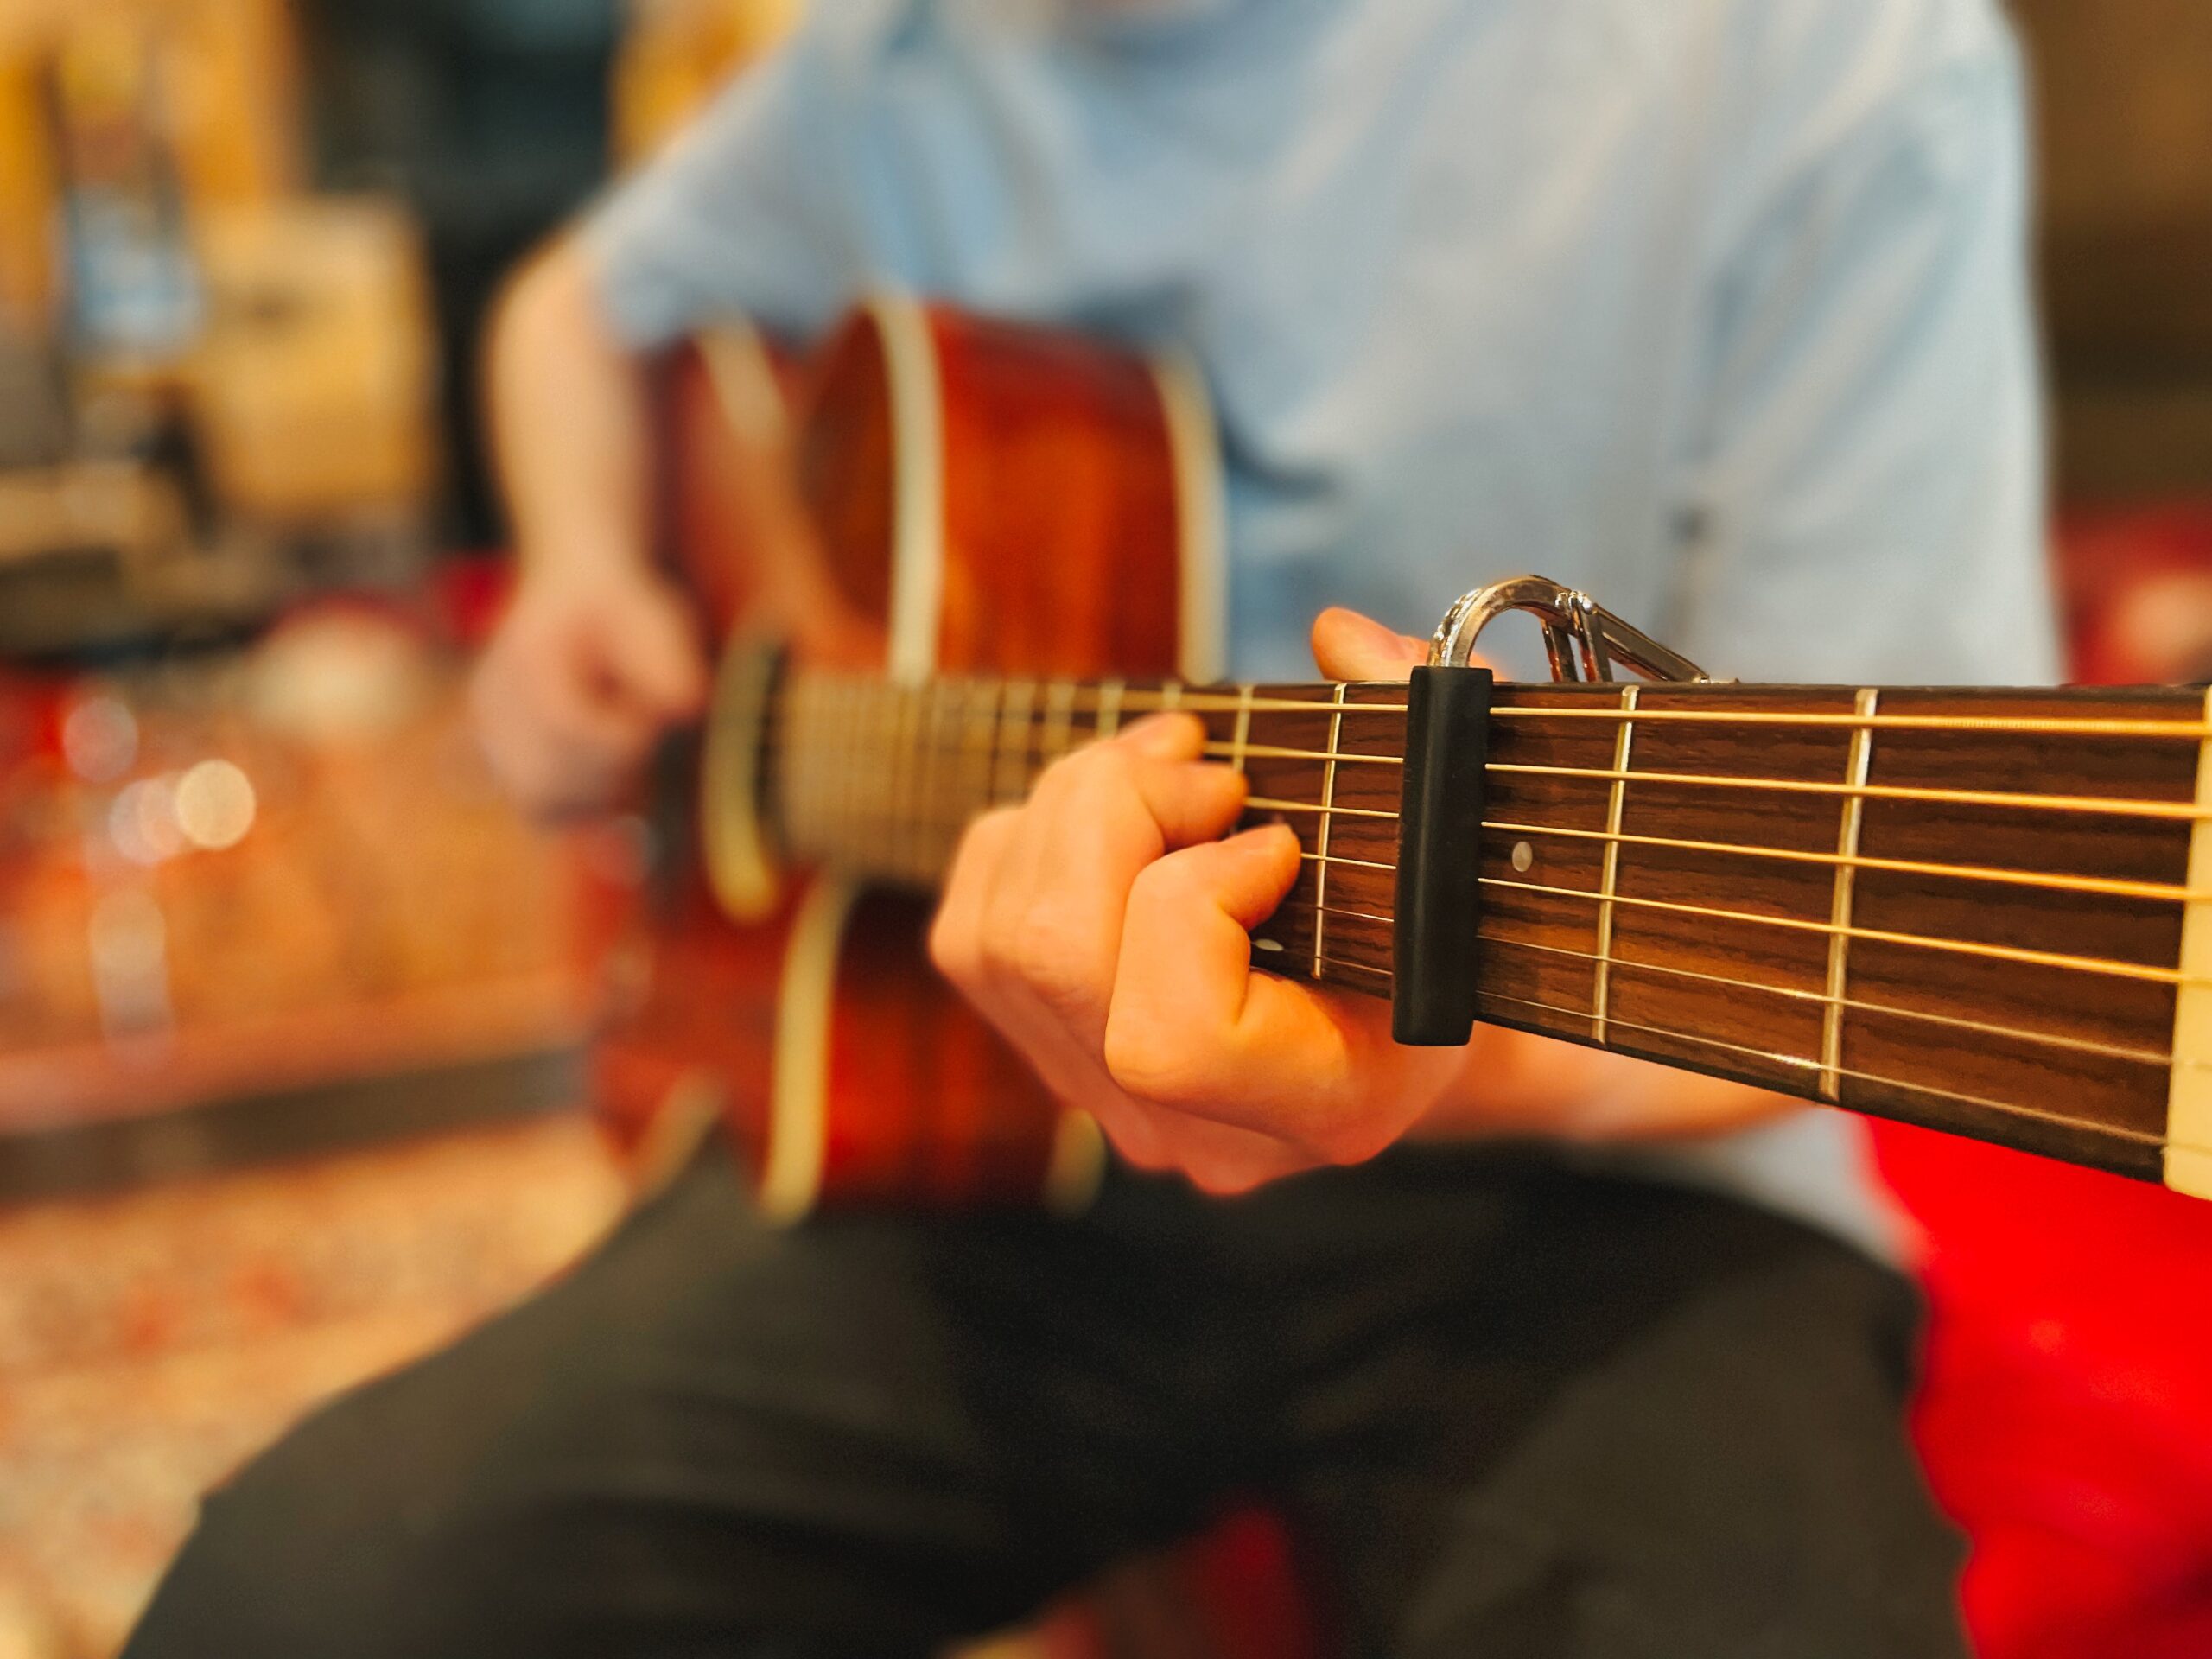 Male playing acoustic guitar fitted with a capo - music lesson